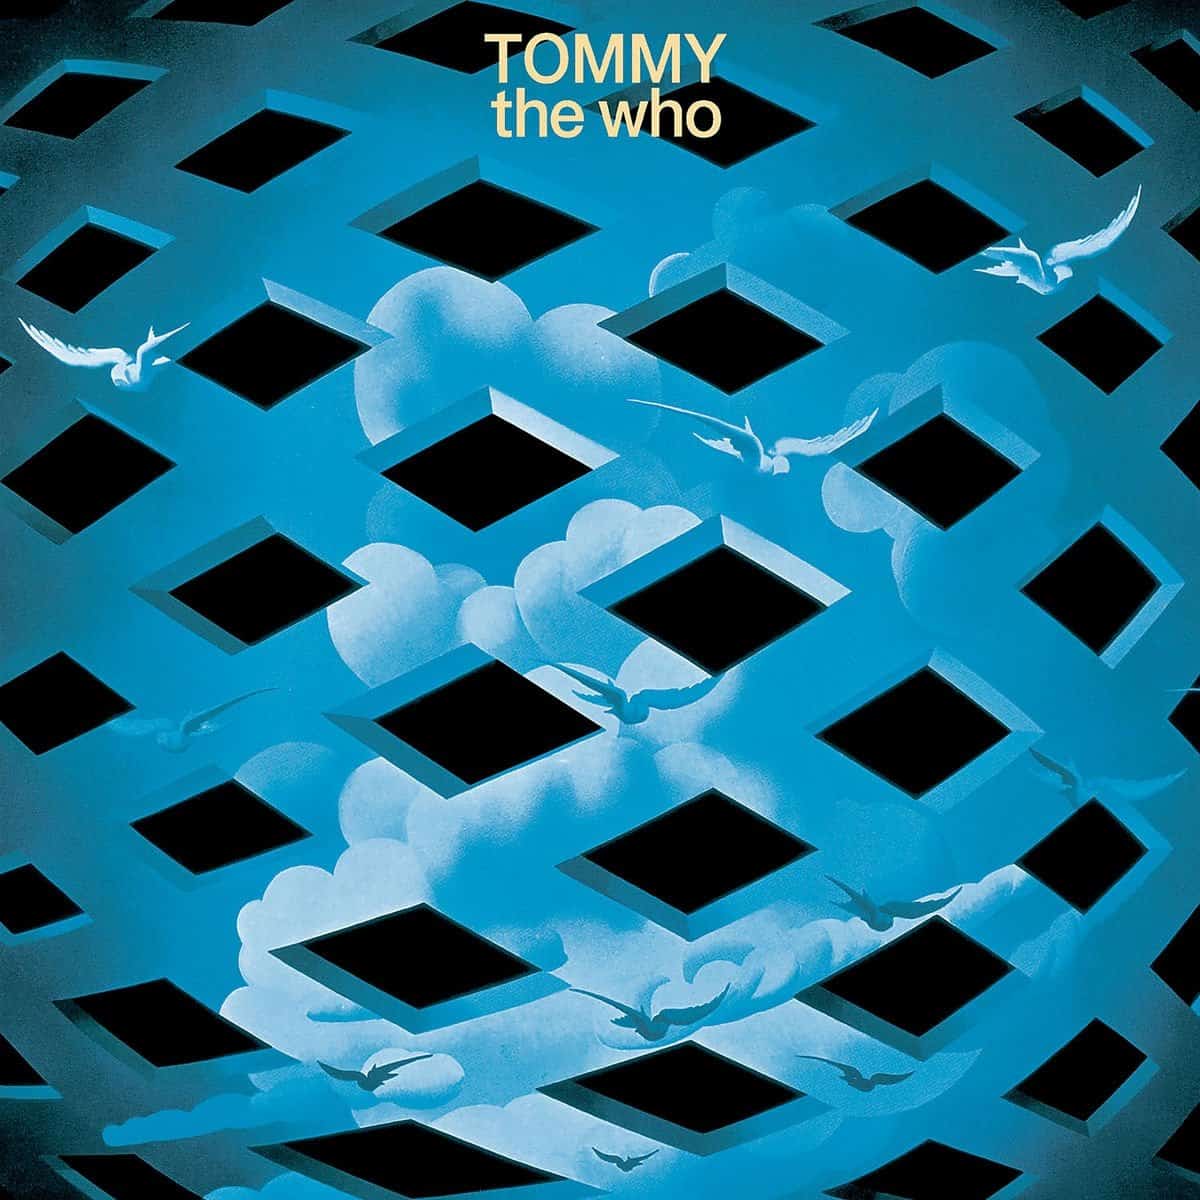 THE WHO - TOMMY